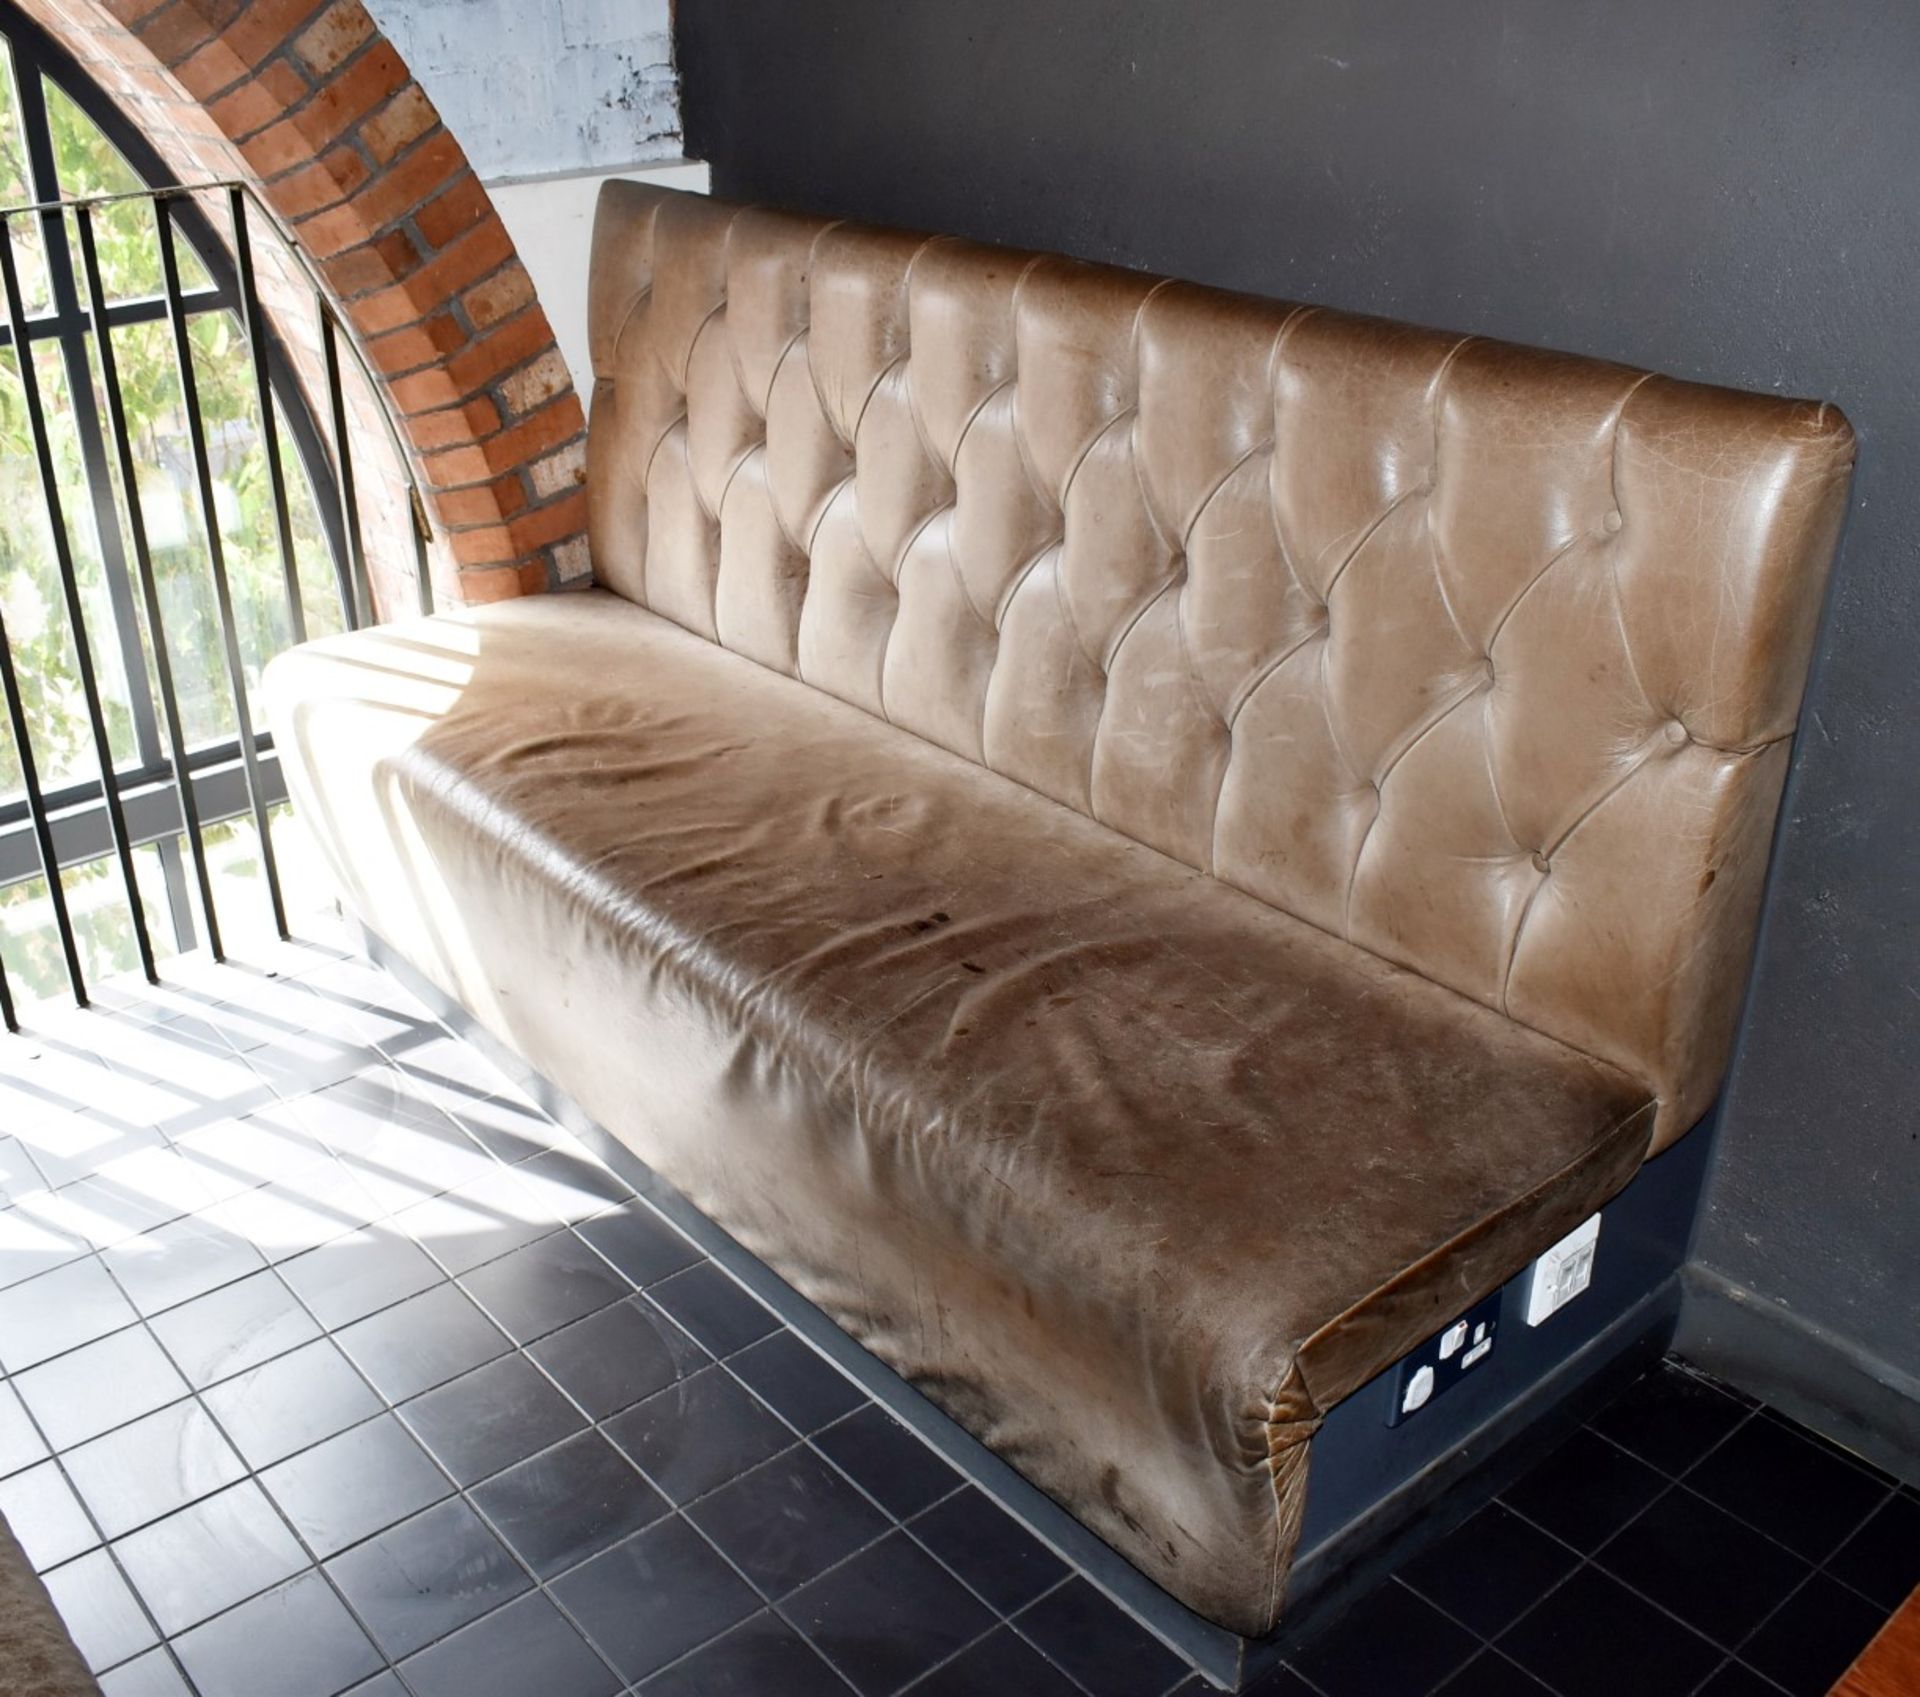 1 x Collection of Restaurant Seating Benches With Brown Leather Upholstery and Studded Backs - Image 2 of 26